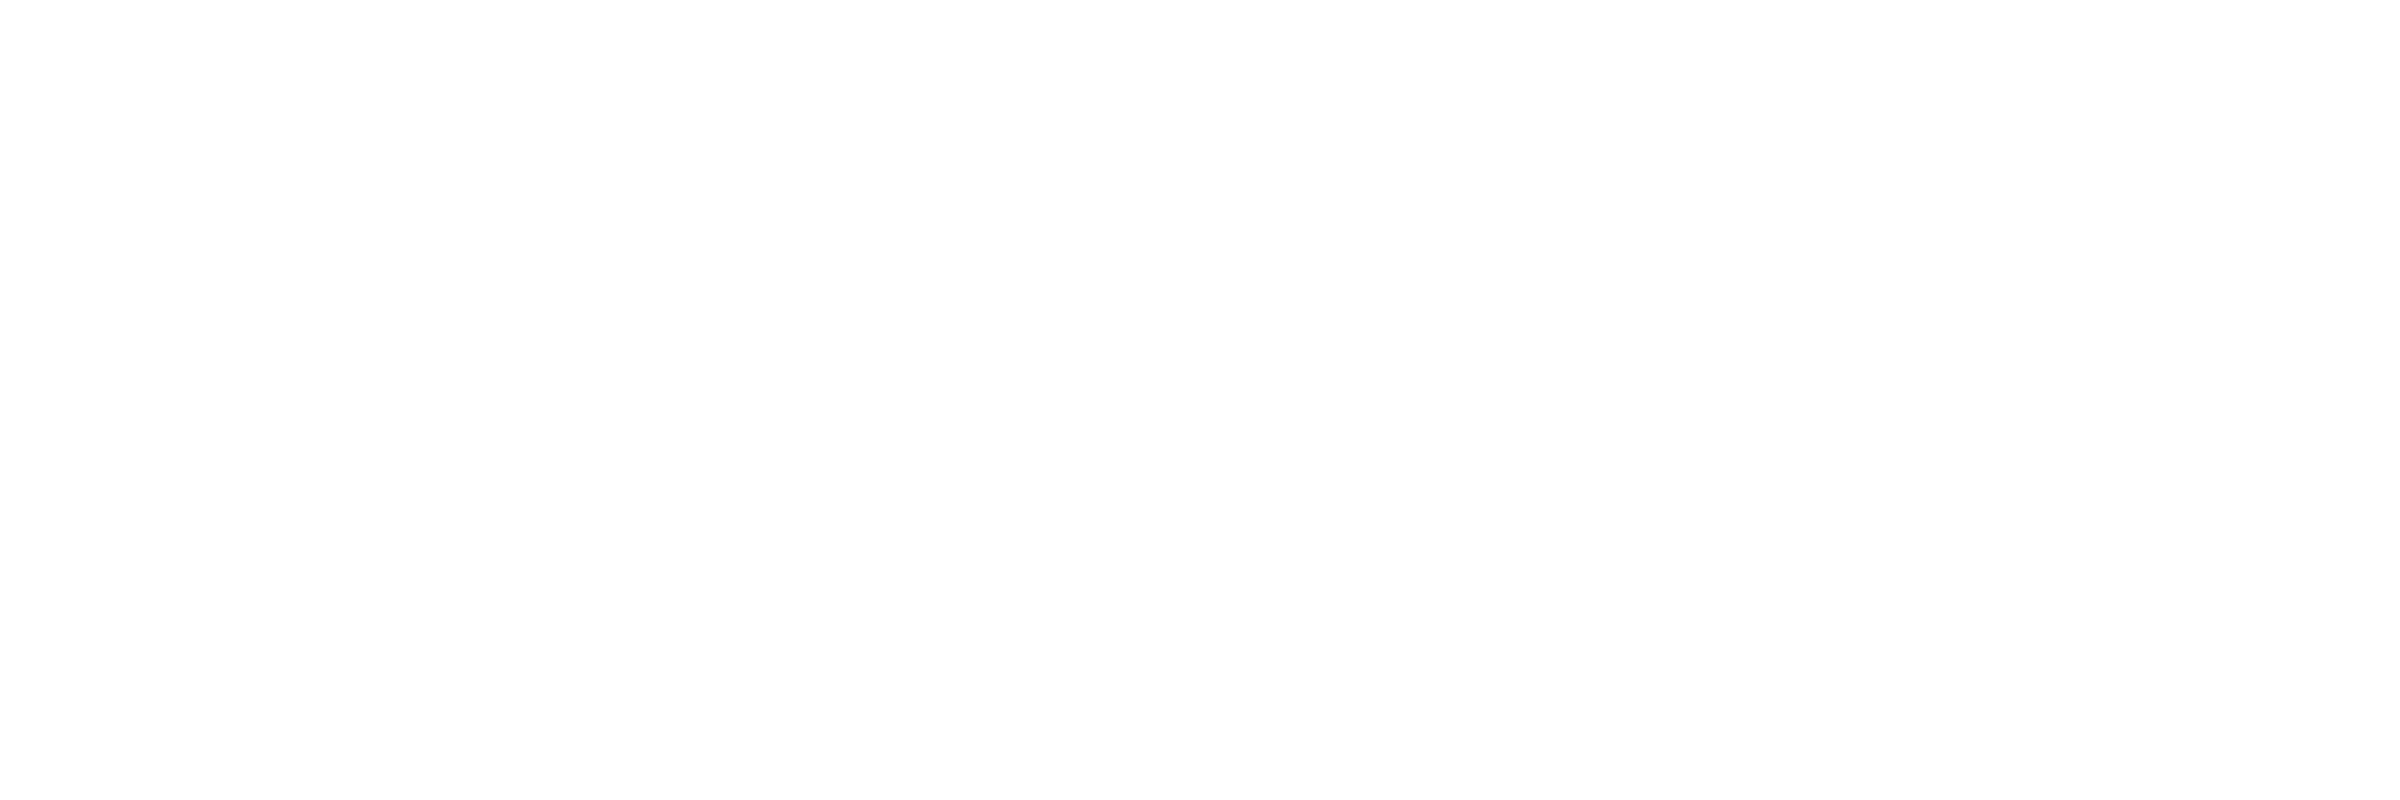 Sex Rep Com Xxxccc - bodyright - Own your body online | Bodily Integrity | UNFPA